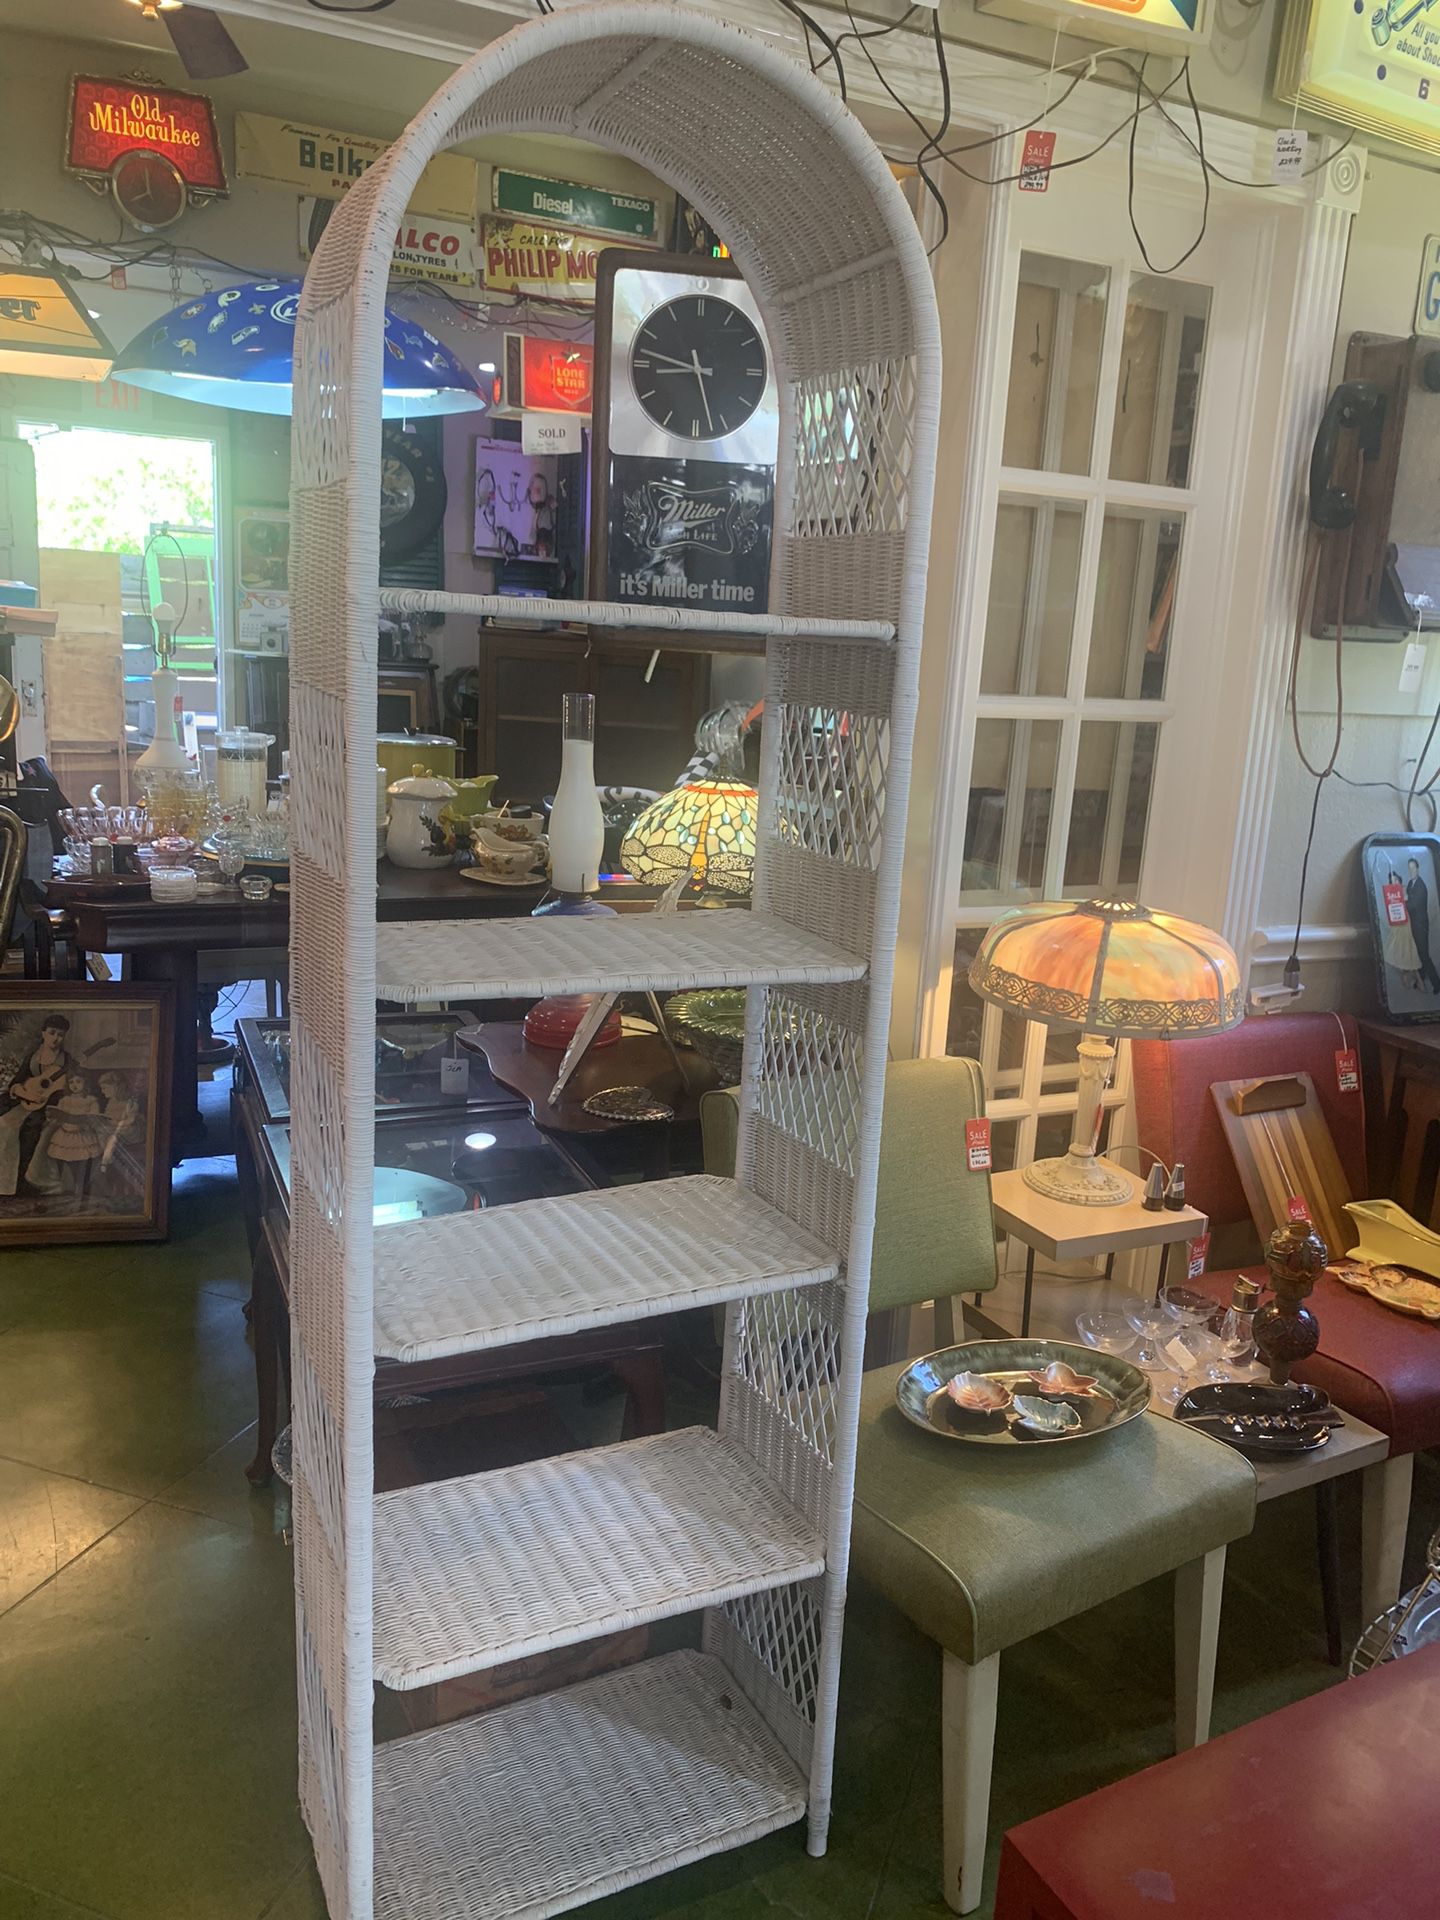 22x12x73 vintage white rattan style wicker mirror mid-century modern shelving. Great shape!  1960s. 1970s.  185.00.  Johanna at Antiques and More. Loc